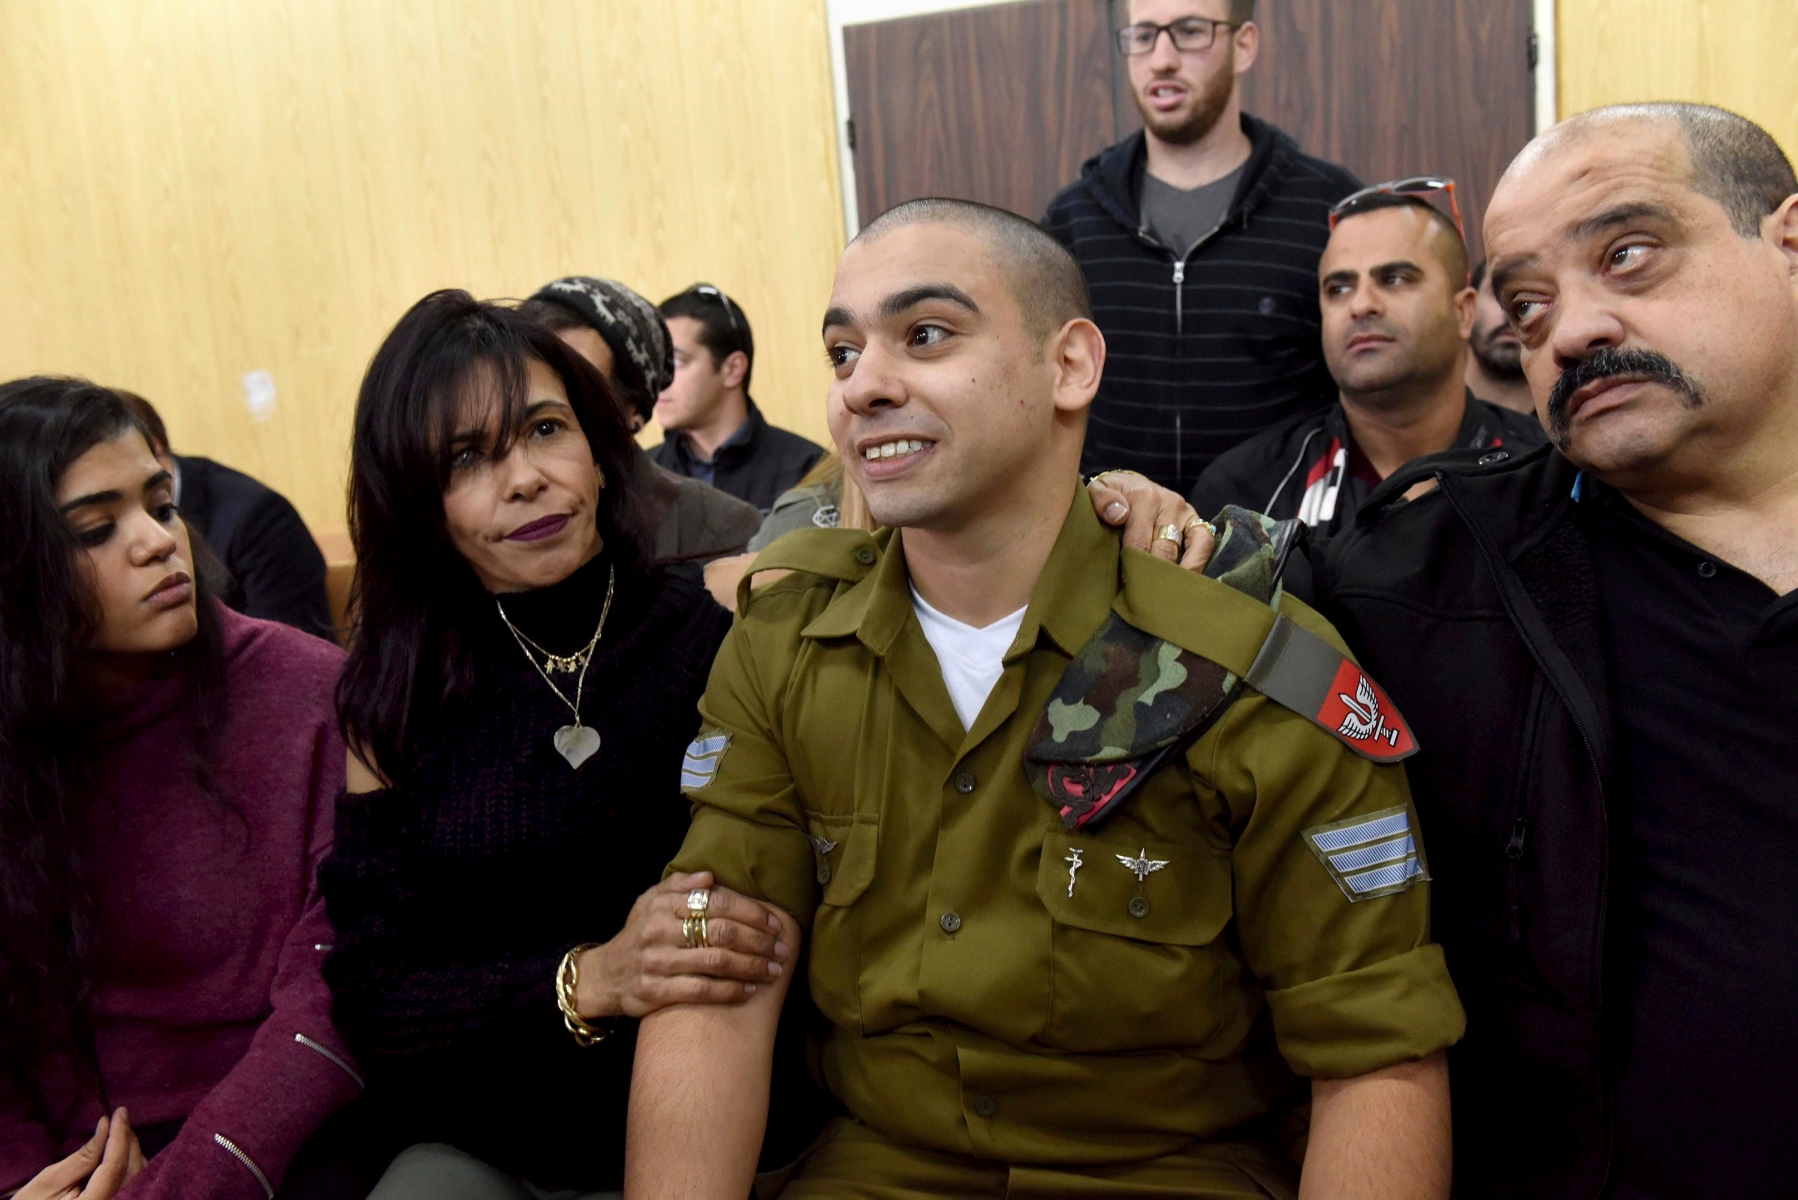 FILE -- In this January 24, 2017 file photo, Israeli soldier Sgt. Elor Azaria attends a sentencing hearing in the military court surrounded by his family, in Tel Aviv, Israel. The Israeli army said a military court on Tuesday, Feb, 21, 2017,  will sentence a soldier convicted of manslaughter for fatally shooting a wounded Palestinian assailant. Azaria faces a maximum sentence of 20 years, though analysts expect him to receive less than that. (Debbie Hill, Pool via AP, File) Israel Soldier Sentencing